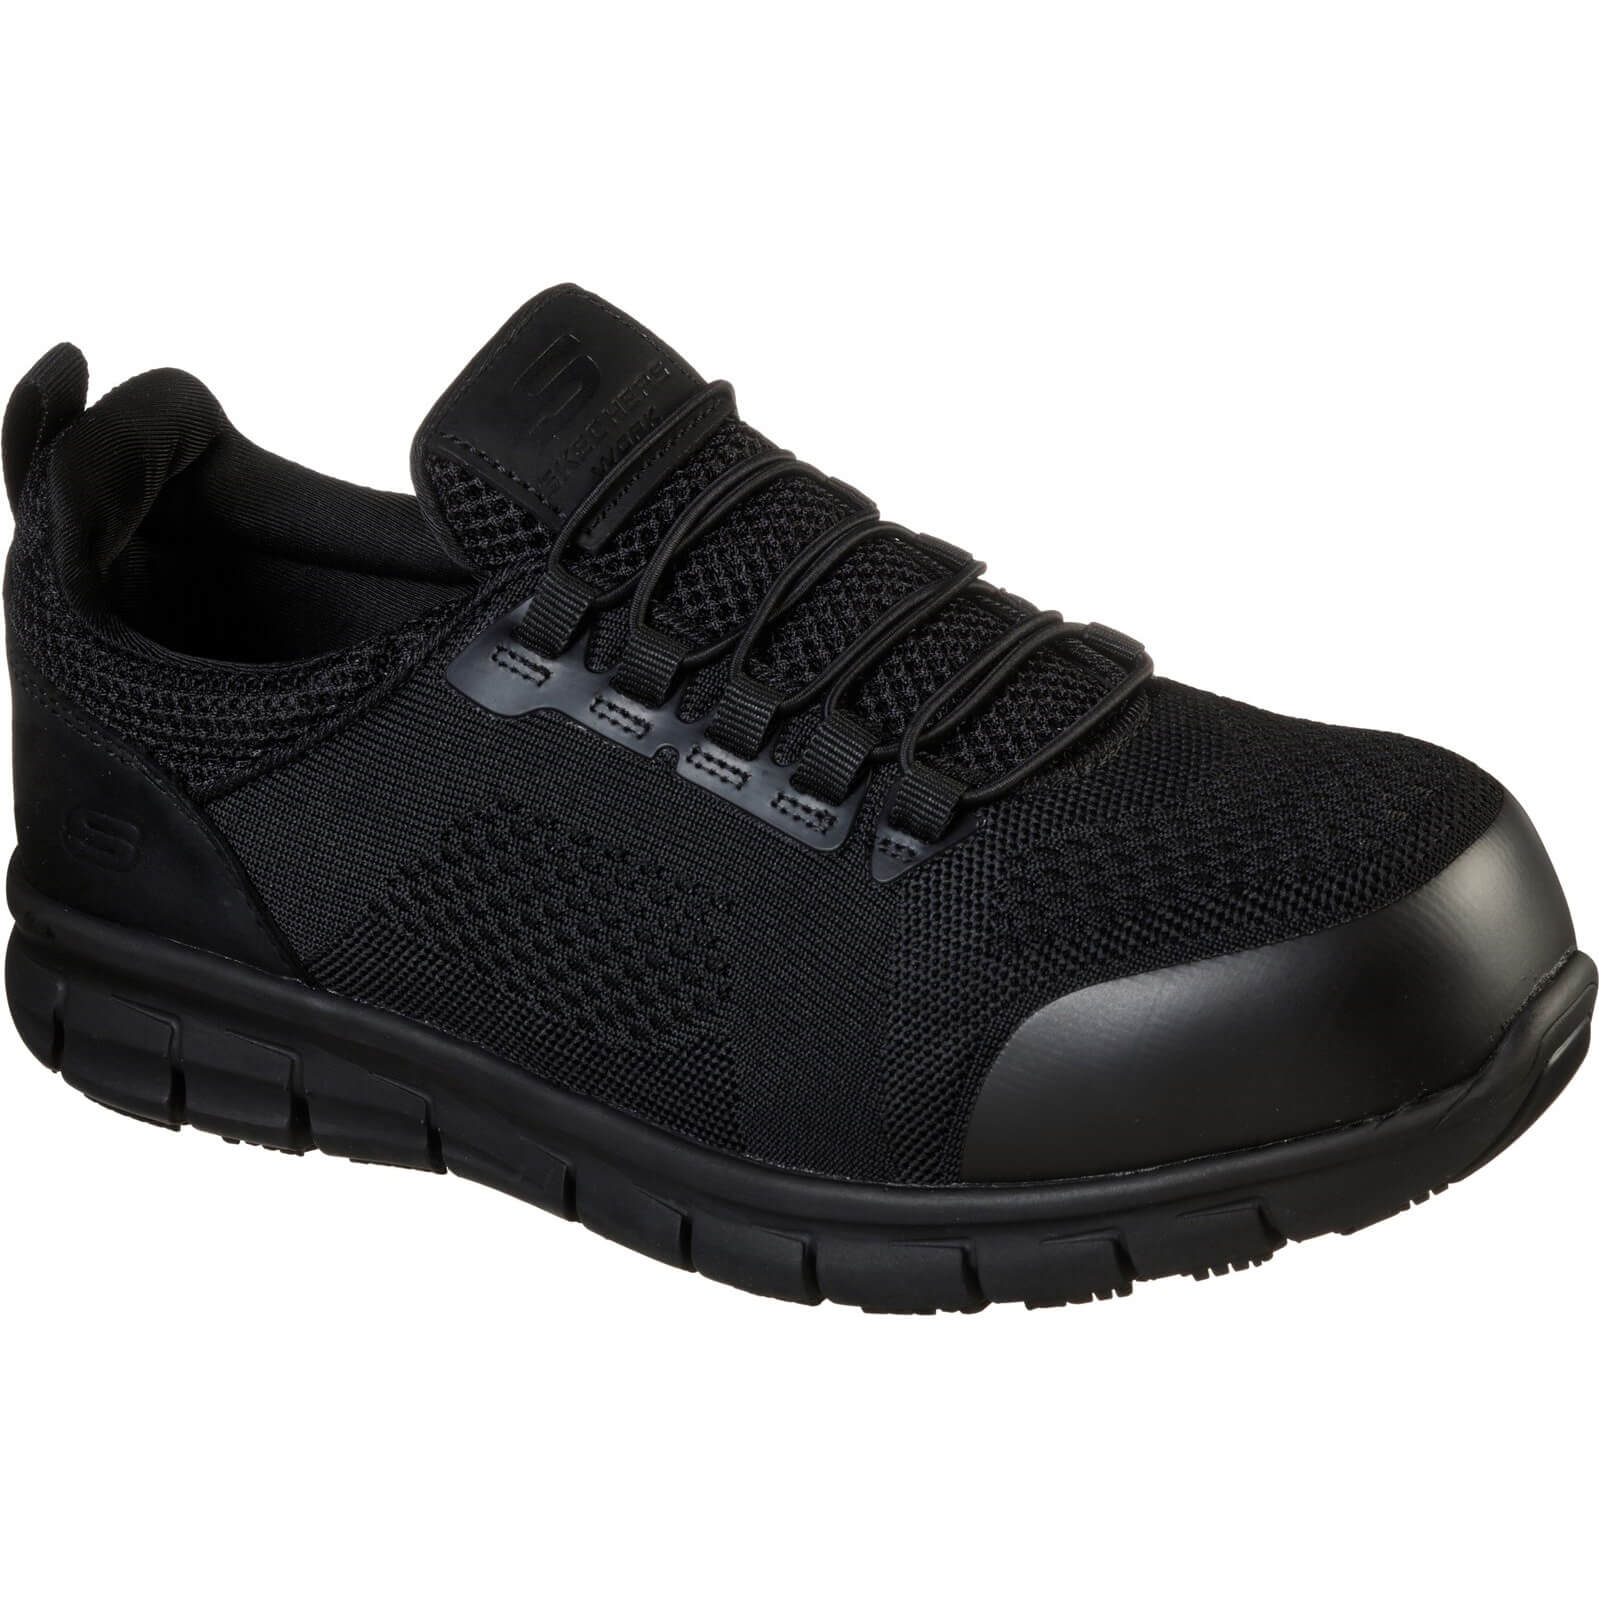 Skechers Synergy Omat Mens Safety Trainers Black Size 7